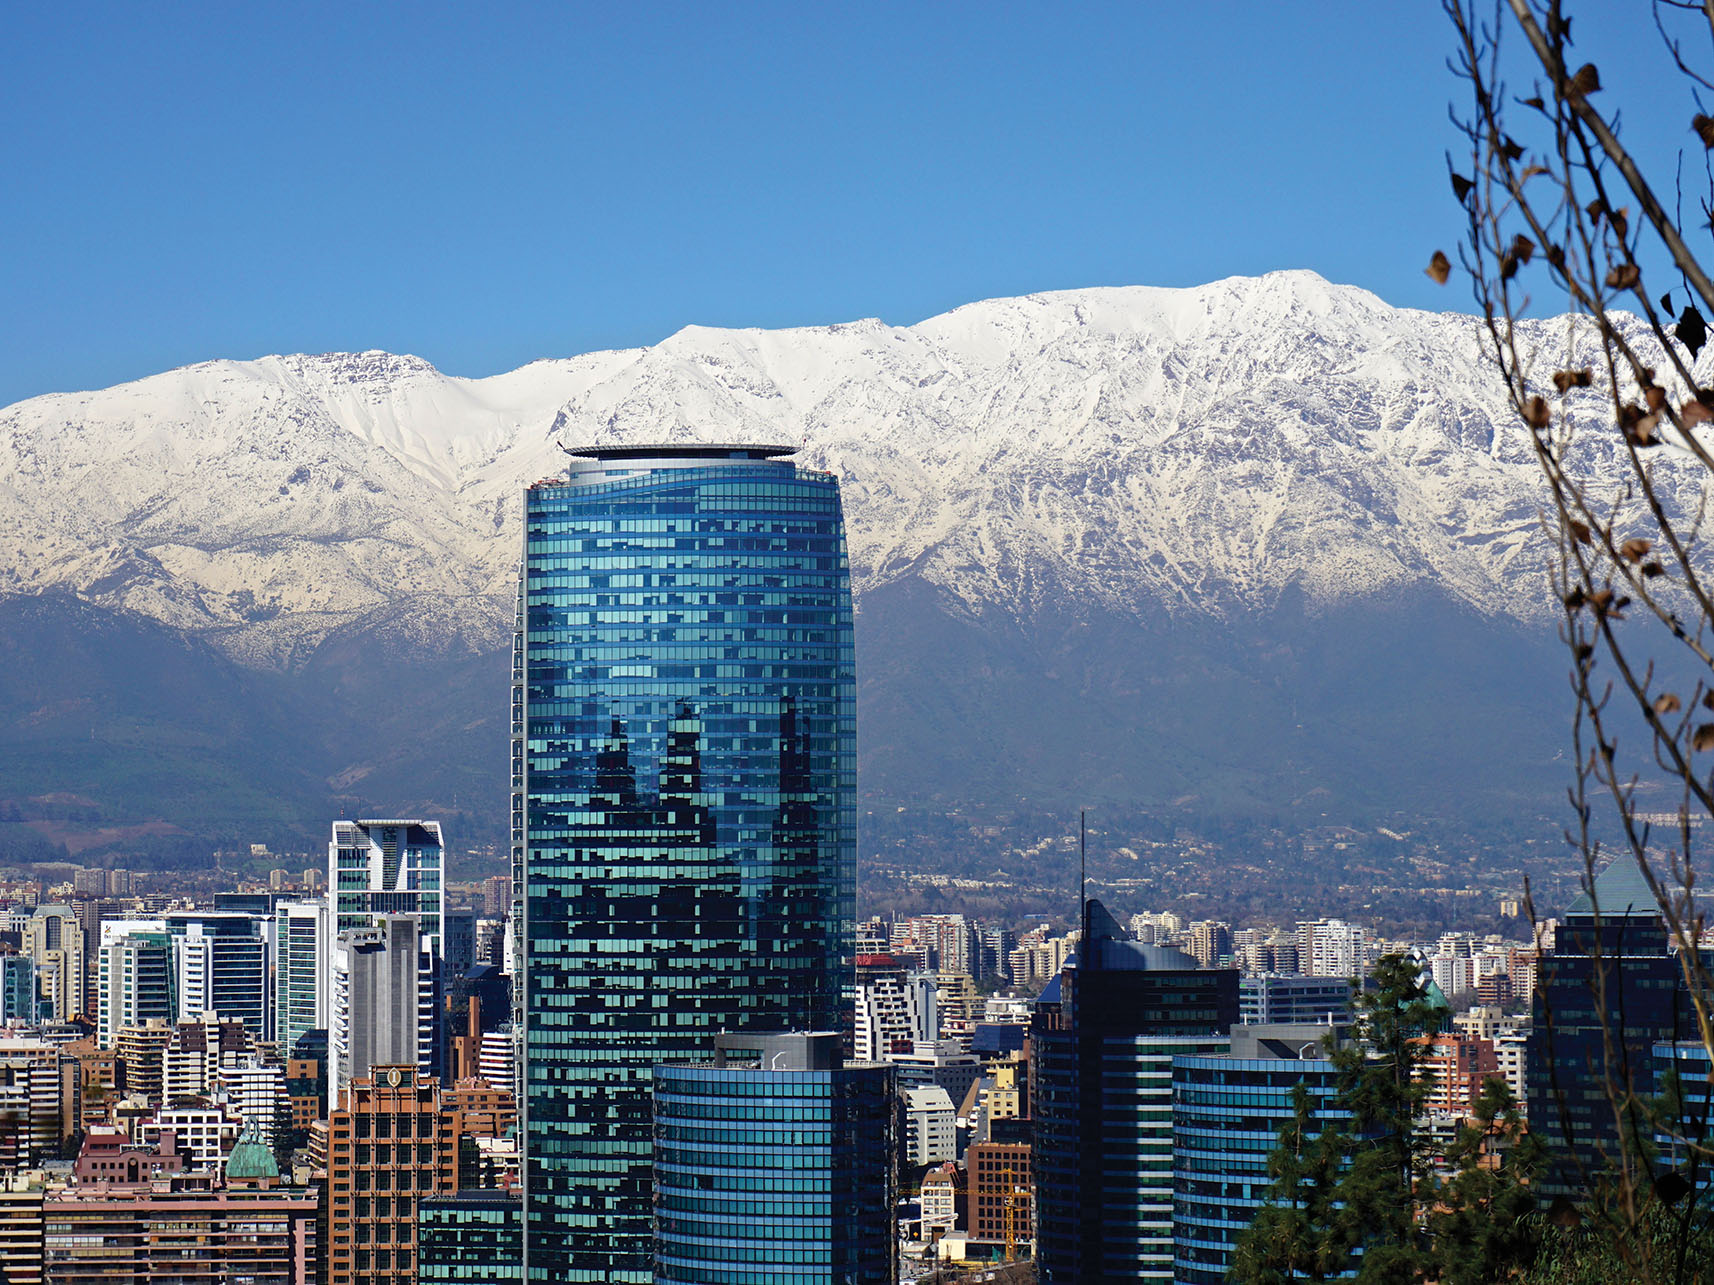 The Andes loom behind the modern buildings of the Santiago skyline. (Photo by alobos Life.)